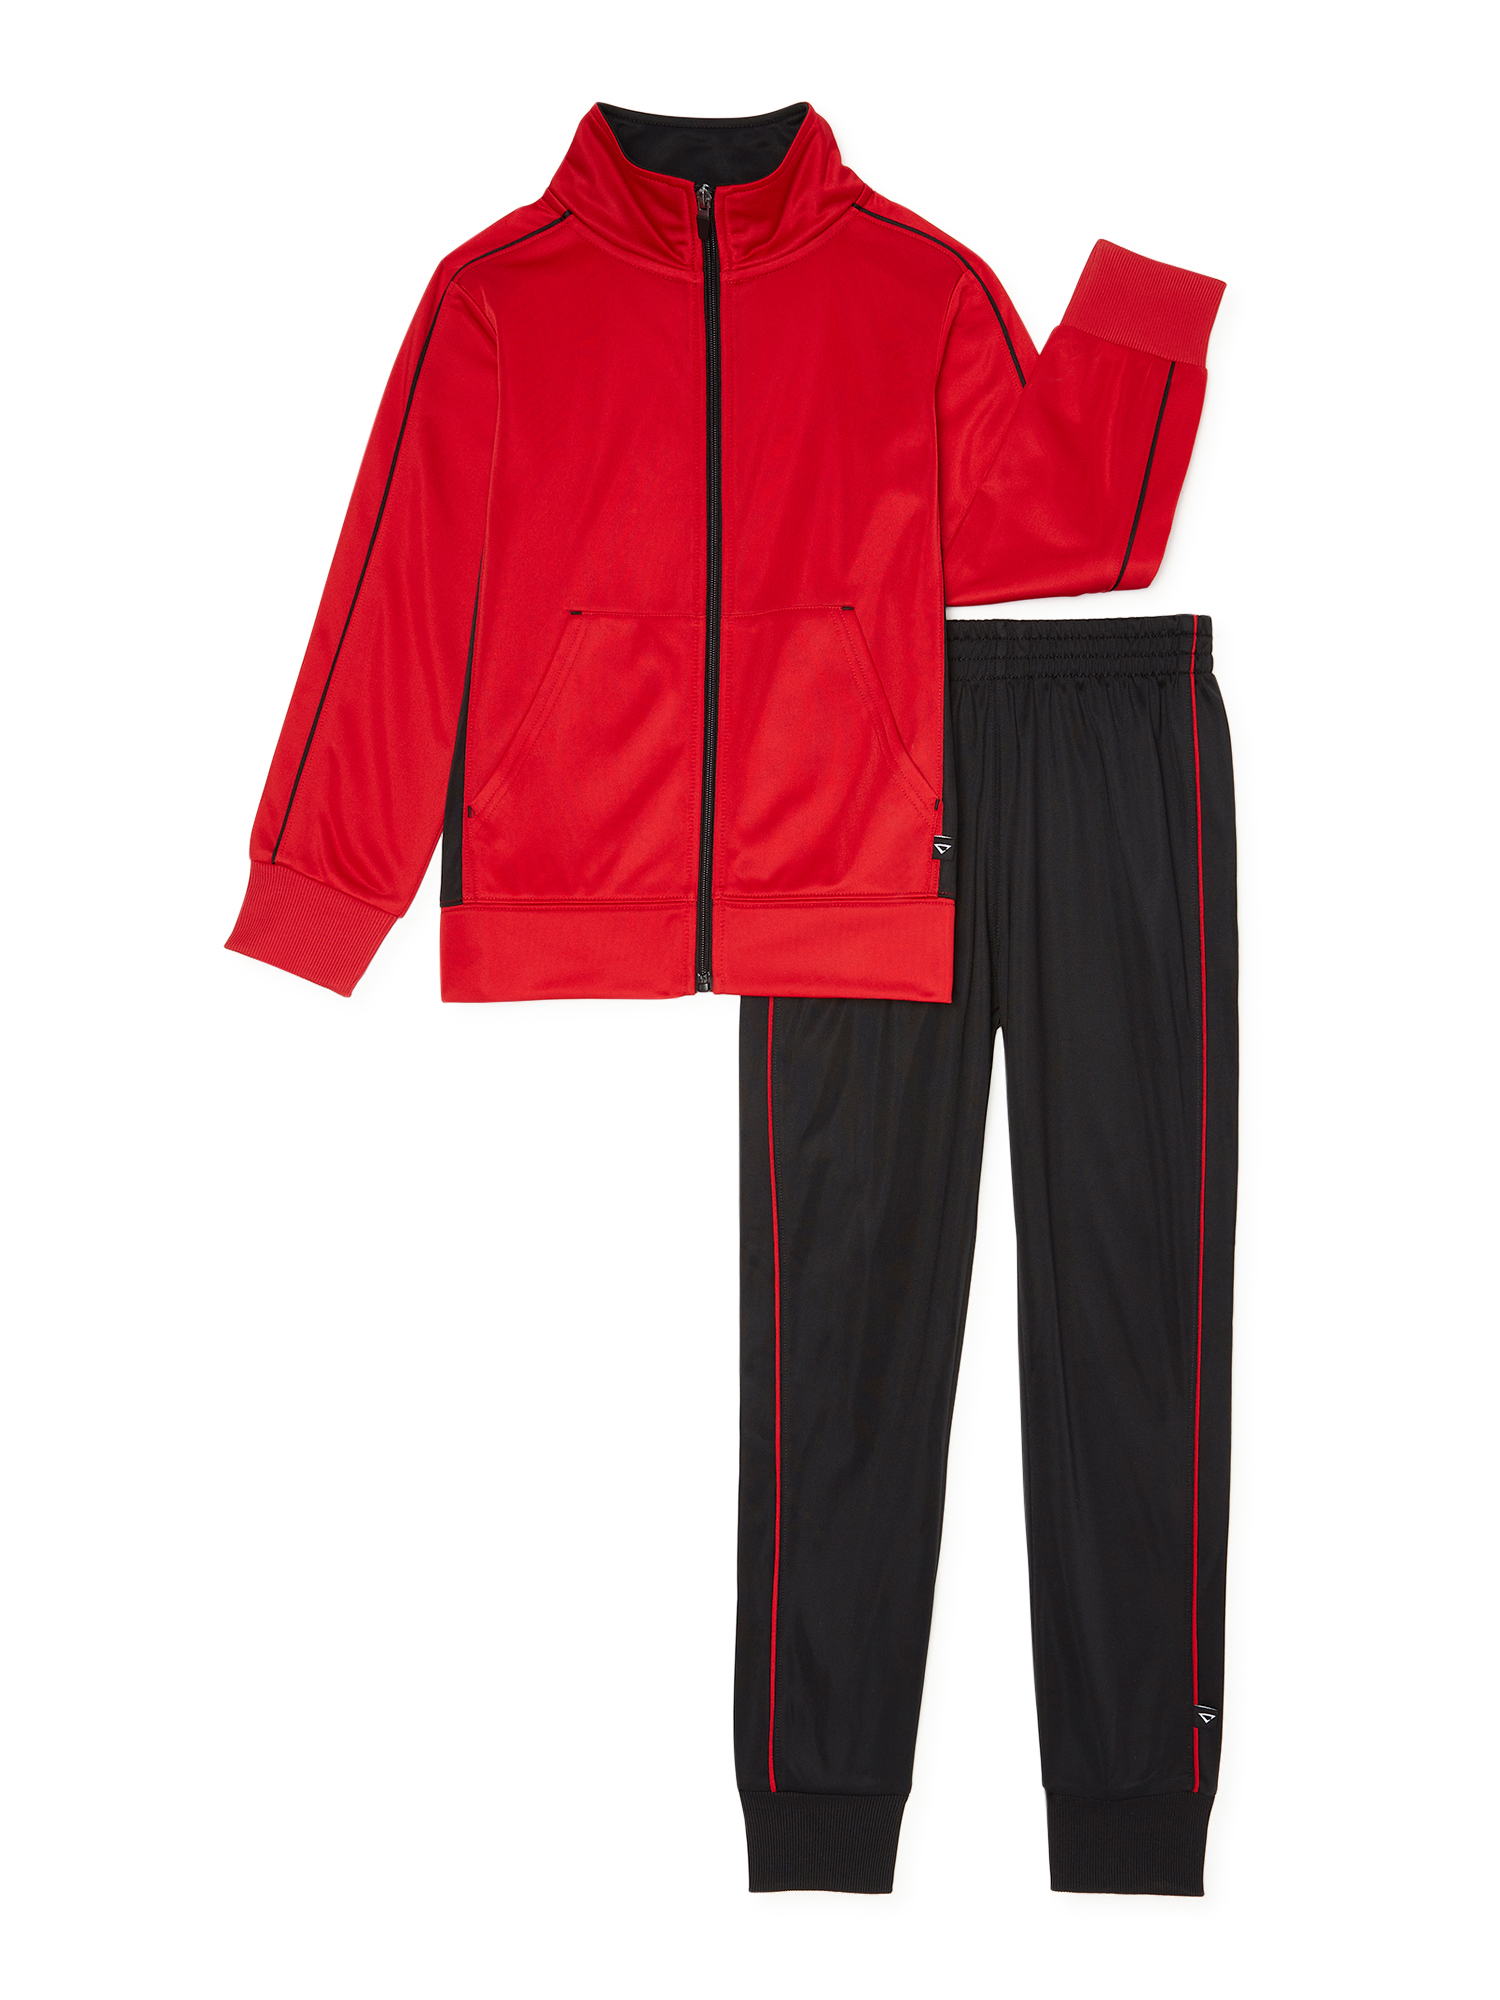 Cheetah Boys’ Tricot Performance Tracksuit, 2-Piece Outfit Set, Sizes 4-16 & Husky - image 1 of 3